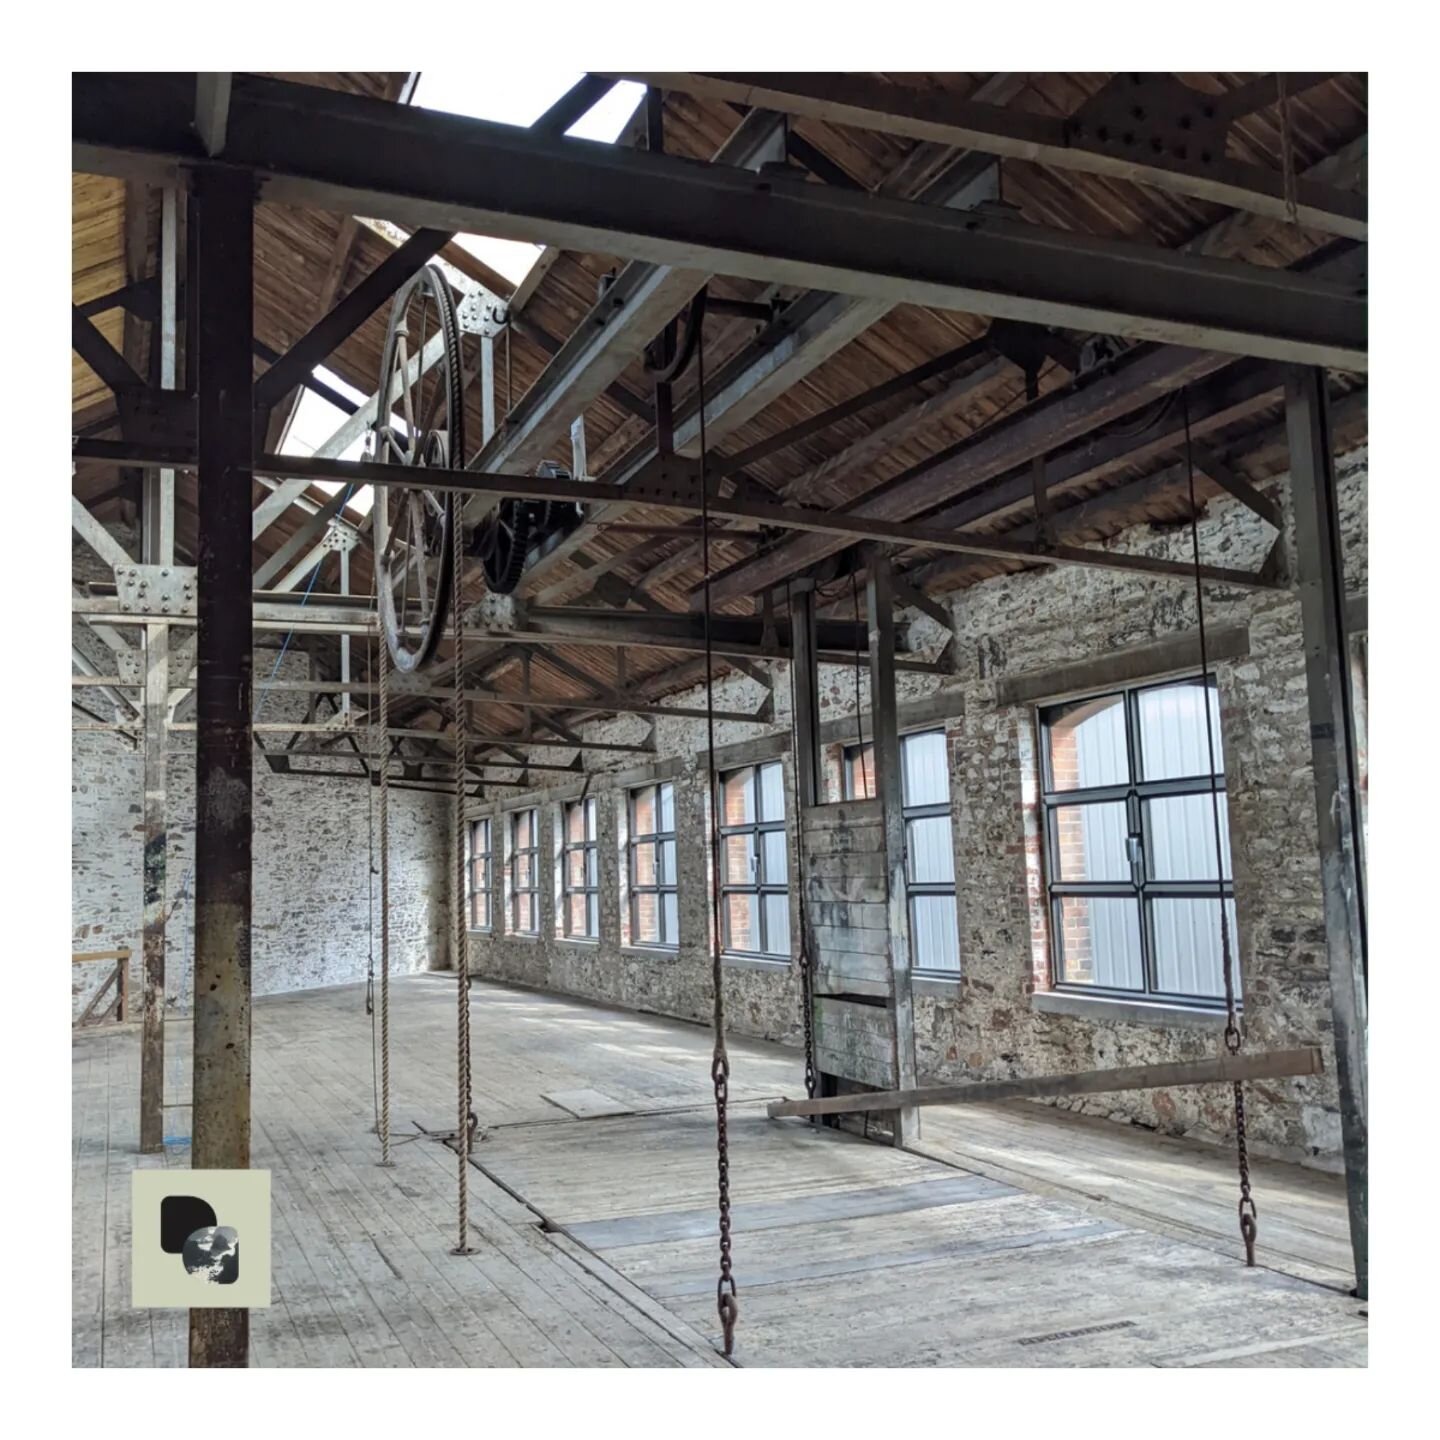 ⚪ALMA YARD⚪

We are so impressed by the redevelopment of @alma_yard in Plymouth by&nbsp;Eat Work Art. 

Just look at that flood of light pouring into the former rope factory.

The first phase of the site's development is occupied and the sense of com